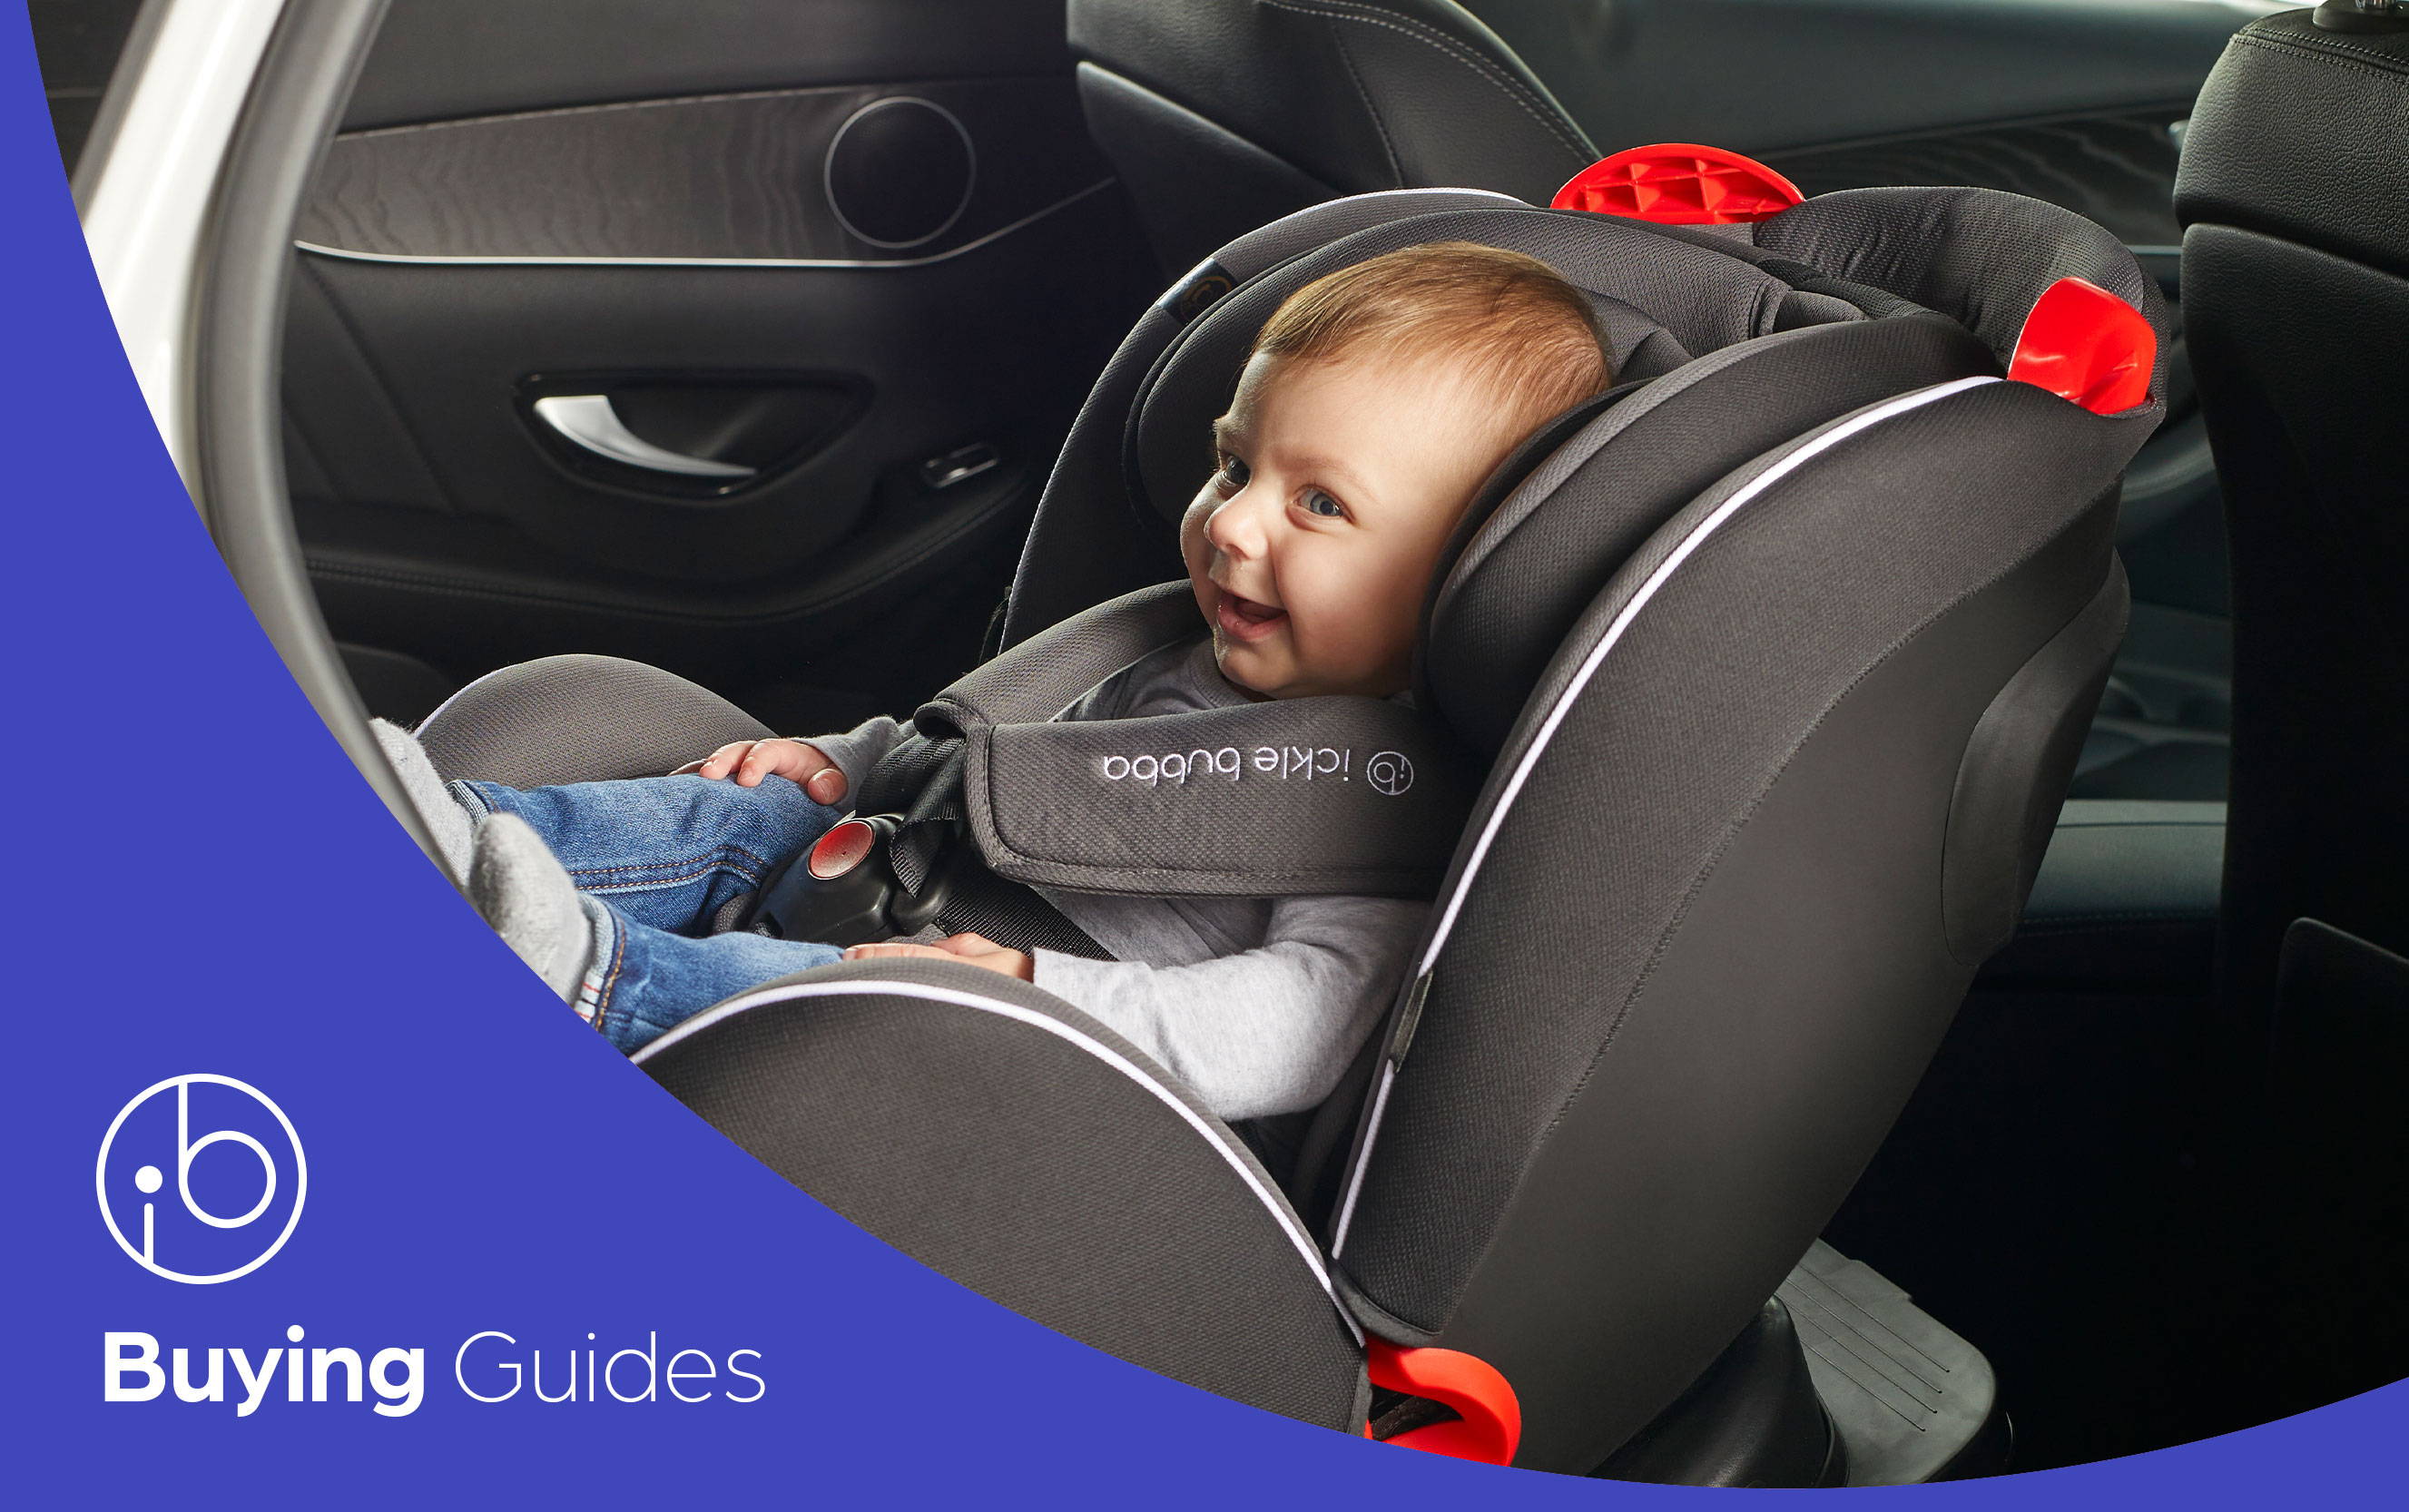 What is ISOFIX and how does it work?